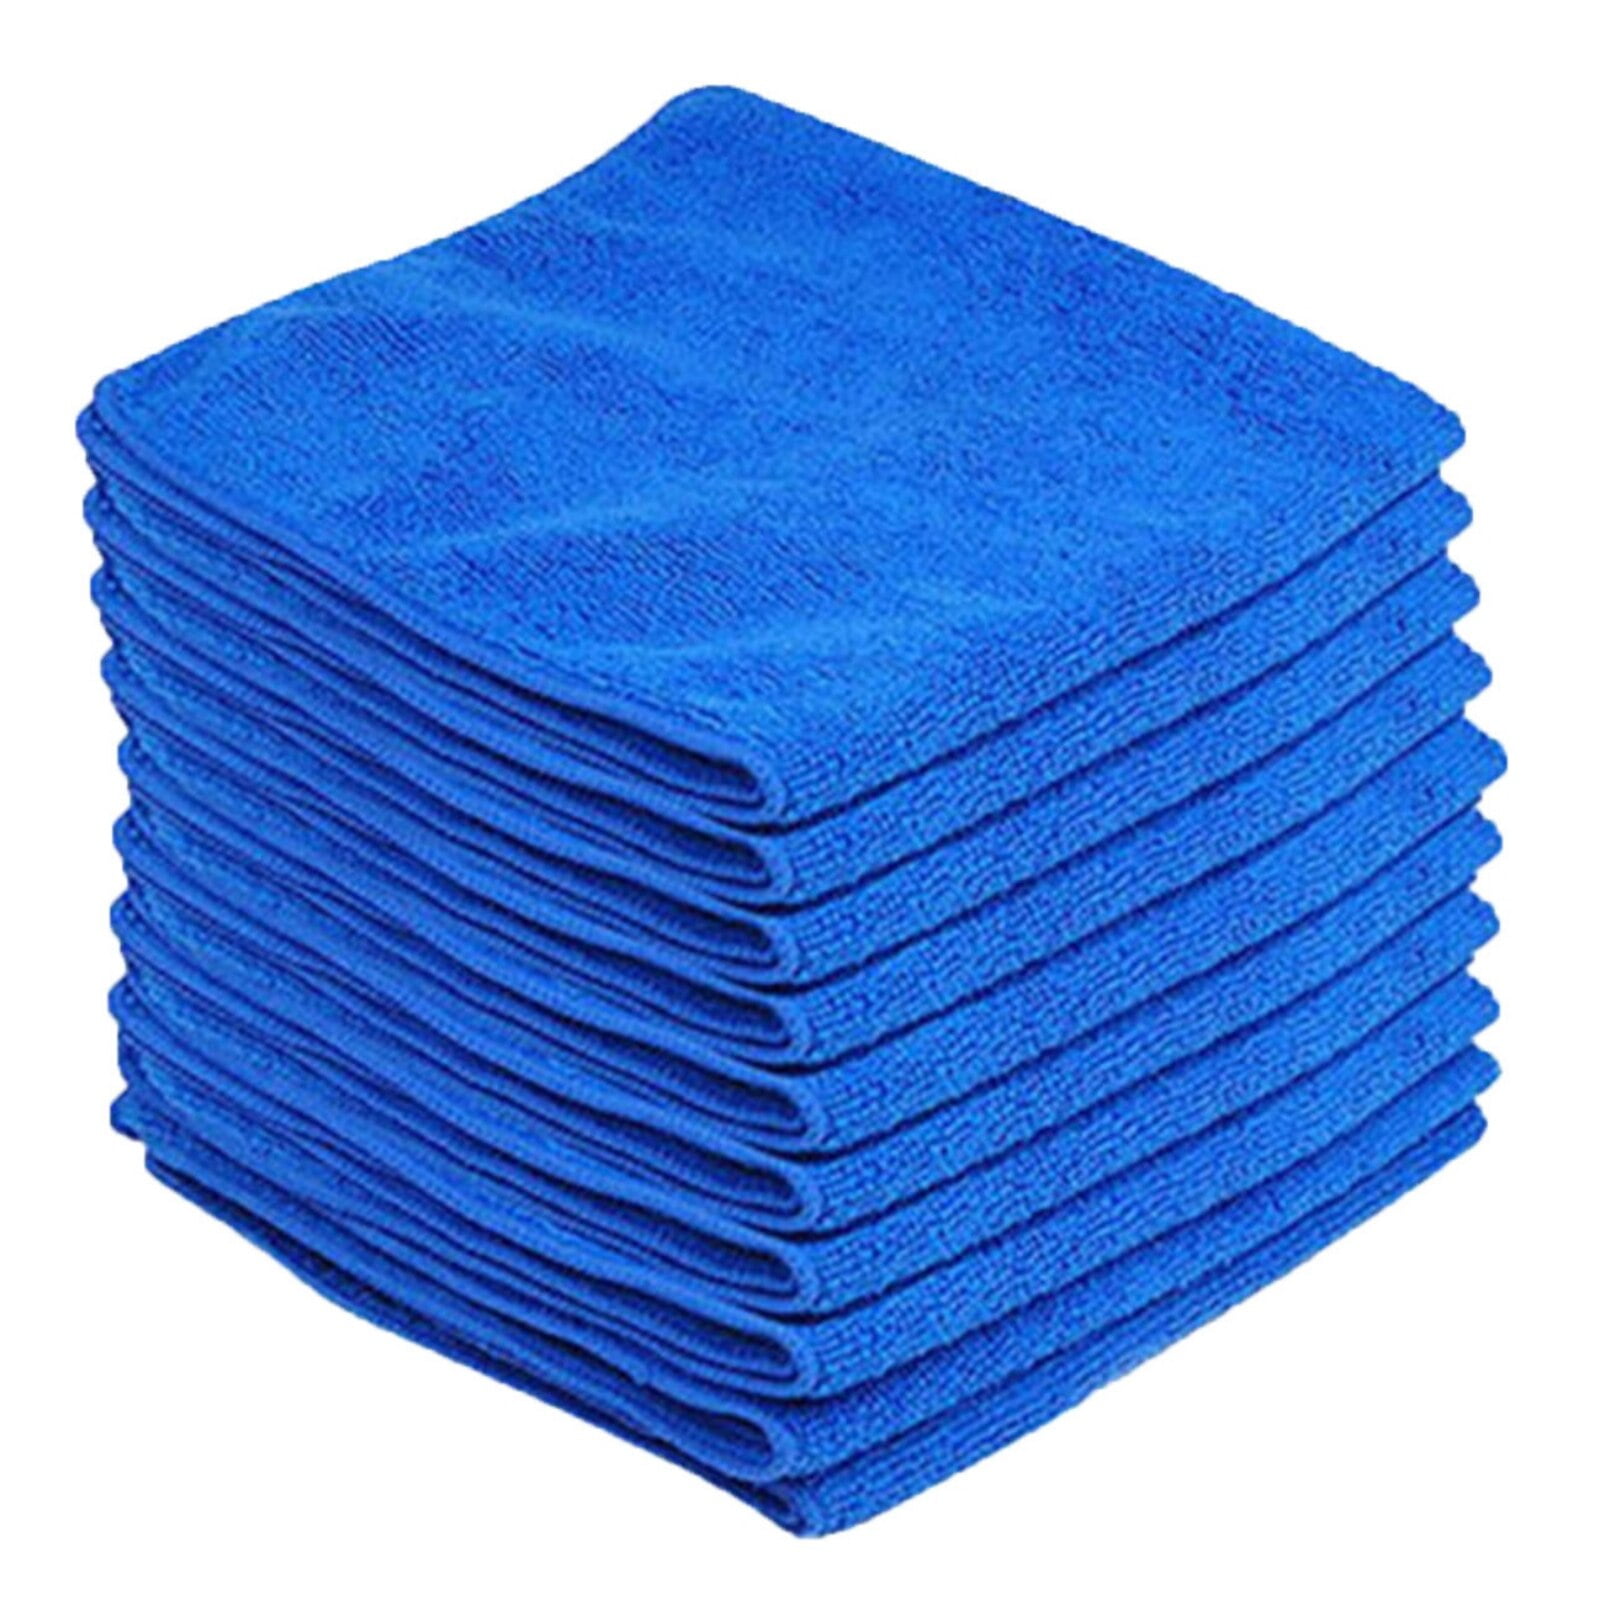 CCidea 12 Pack Microfiber Cleaning Cloth, Lint Free Reusable Dish Towels, Microfiber Towel for Kitchen, Home and Car Cleaning (12x12 inch) , Blue